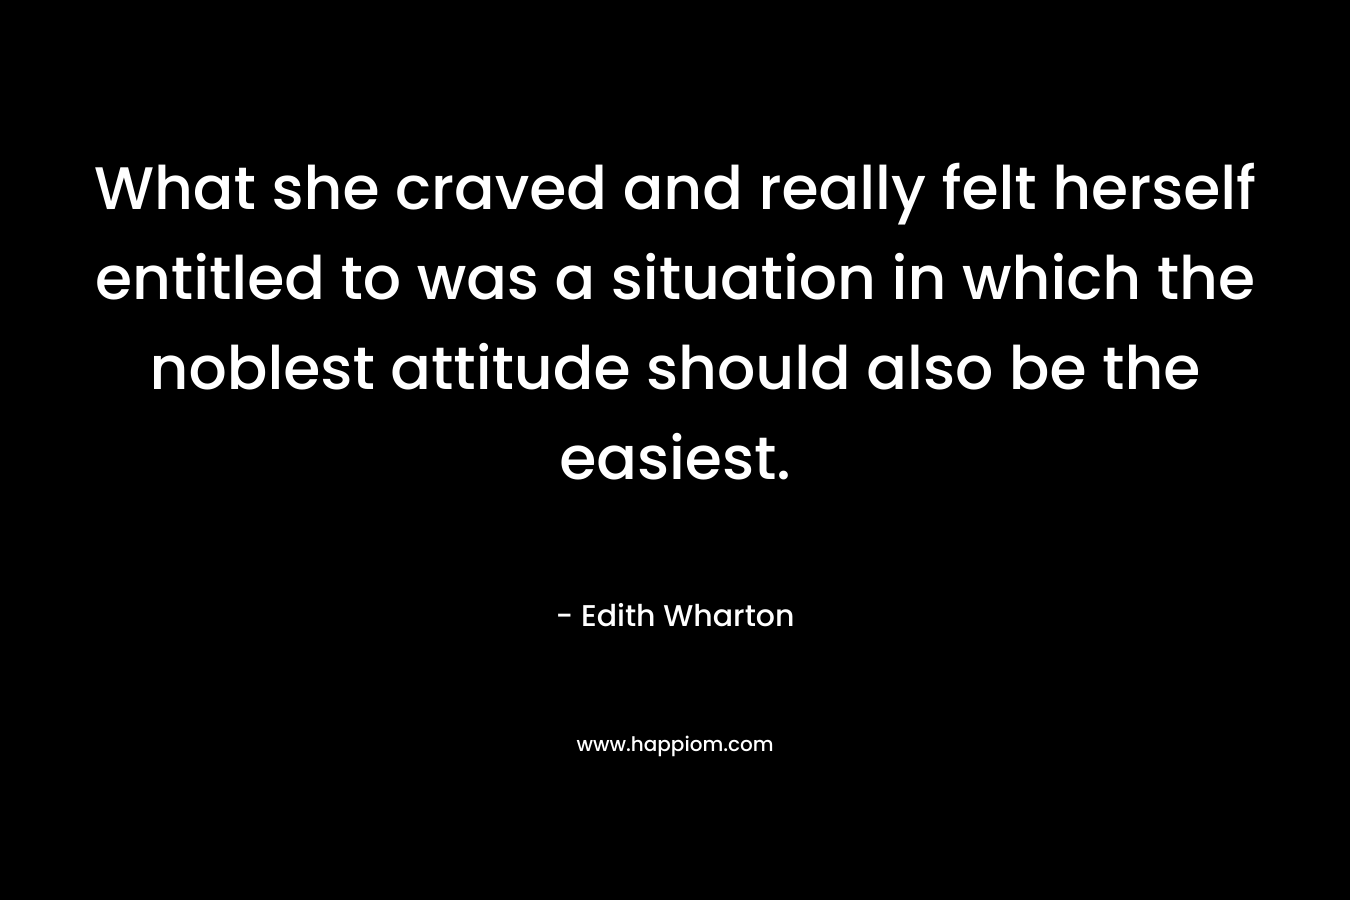 What she craved and really felt herself entitled to was a situation in which the noblest attitude should also be the easiest. – Edith Wharton